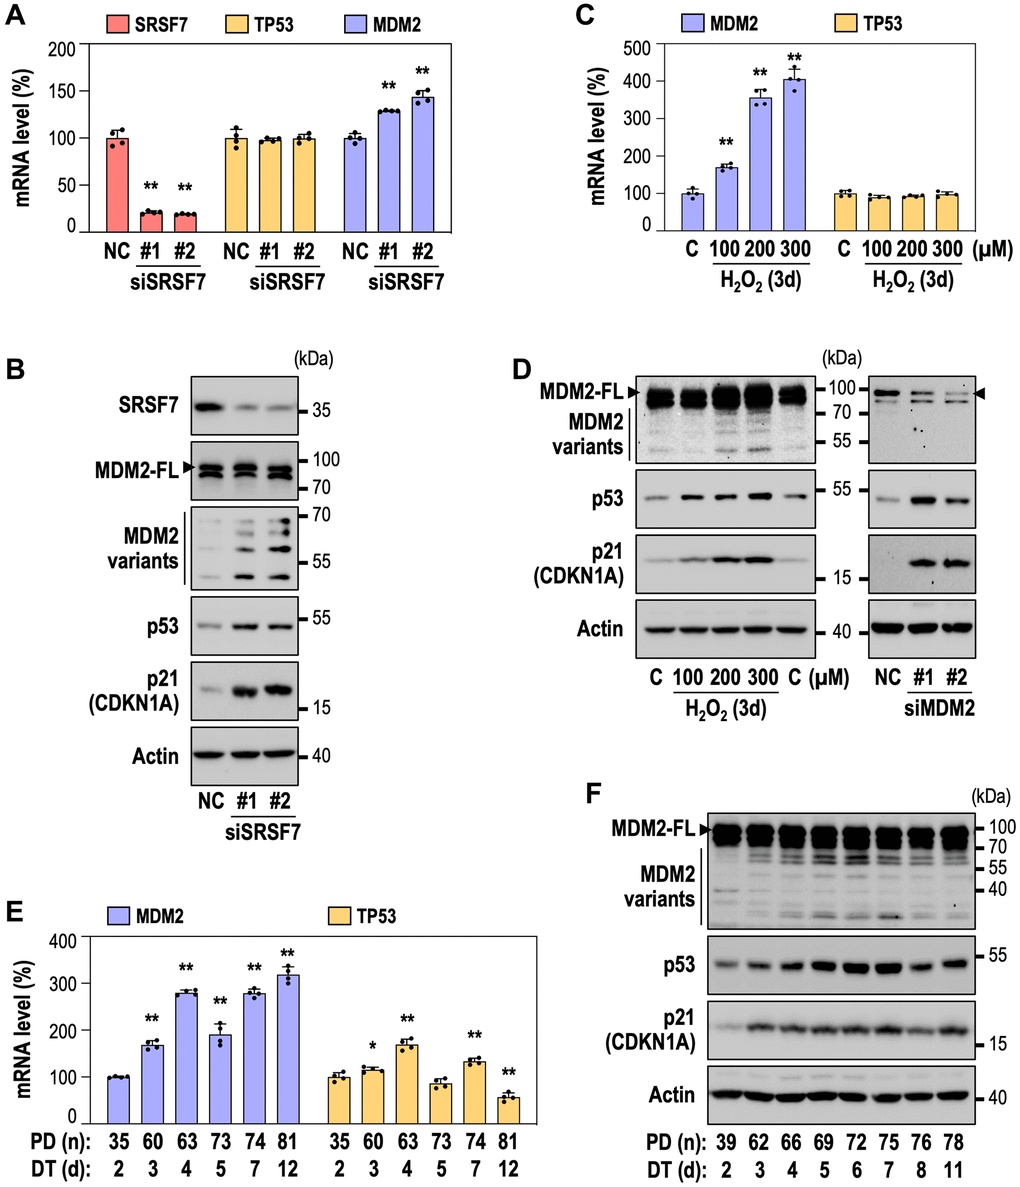 SRSF7 knockdown-mediated senescence is accompanied by the generation of MDM2 splice variants. (A, B) HDFs (DT2) were transfected with siRNA against either negative control (NC) or SRSF7 for 4 days. (A) mRNA level of SRSF7, TP53, MDM2 using qPCR. (**p t-test). (B) Western blot analysis of MDM2 splice variants, p53 and p21. (C) mRNA level of MDM2 and TP53 in dose-dependent OSIS using qPCR. (**p t-test). (D) Western blot analysis of MDM2 splice variants, p53 and p21 in dose dependent OSIS, along with western blot analysis of MDM2 knockdown. HDFs (DT2) were transfected with siRNA against either NC or MDM2. (E) mRNA level of MDM2 and TP53 in RS using qPCR. (*p **p t-test). (F) Western blot analysis of MDM2 splice variants, p53 and p21 in RS.